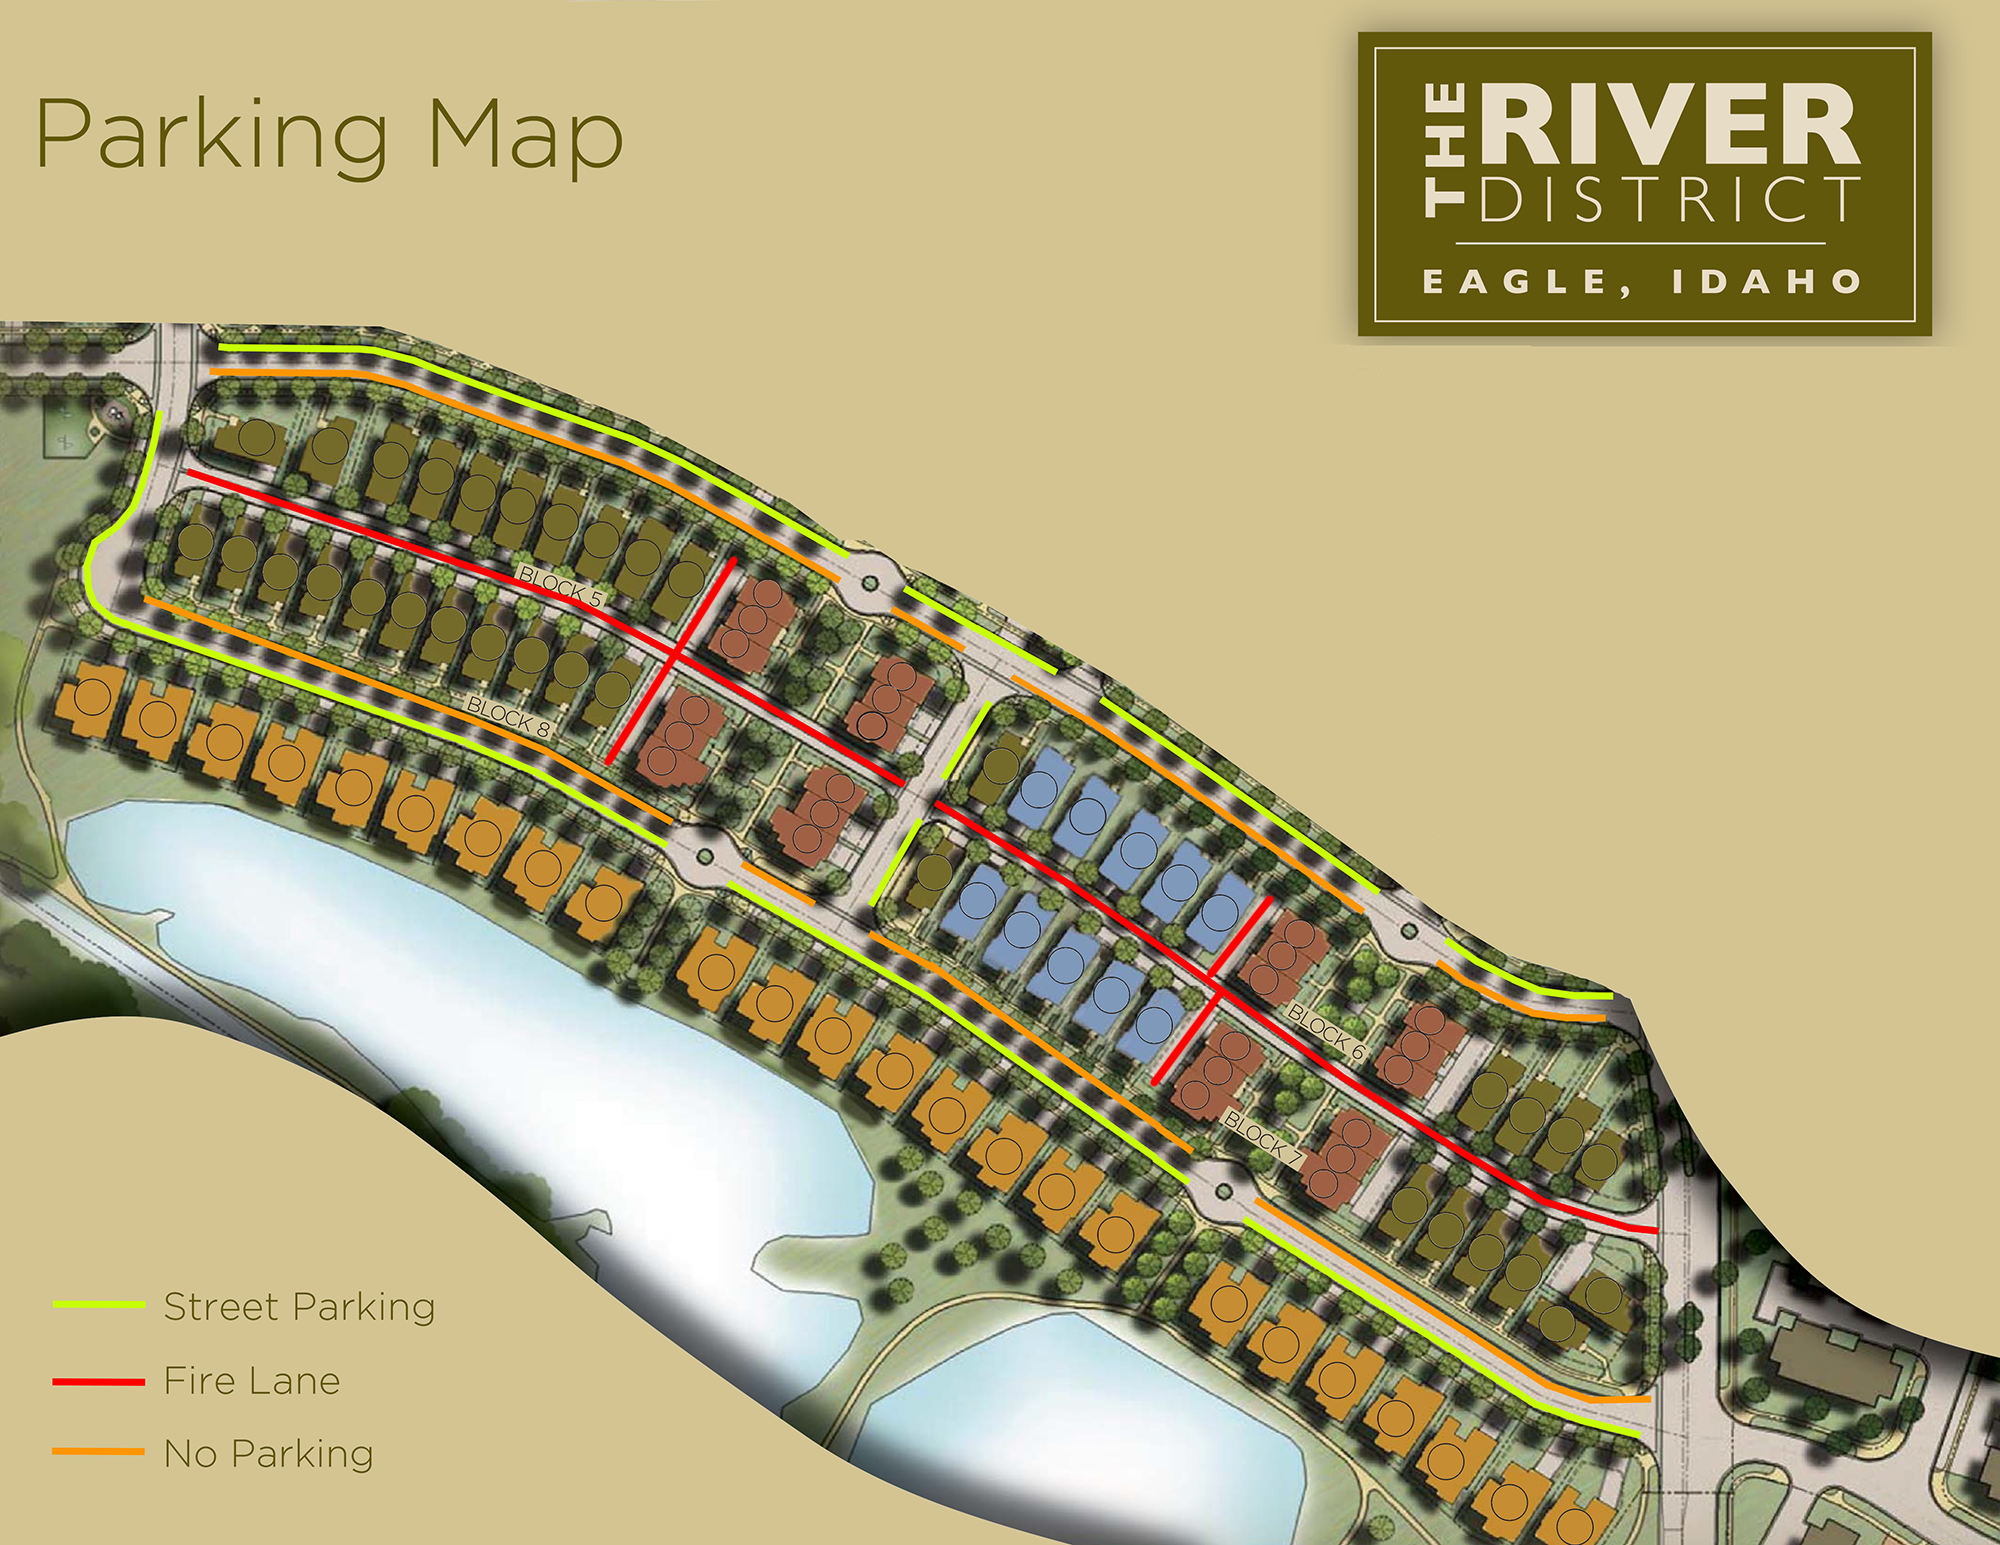 River District Parking Map 7-24-18 no rules